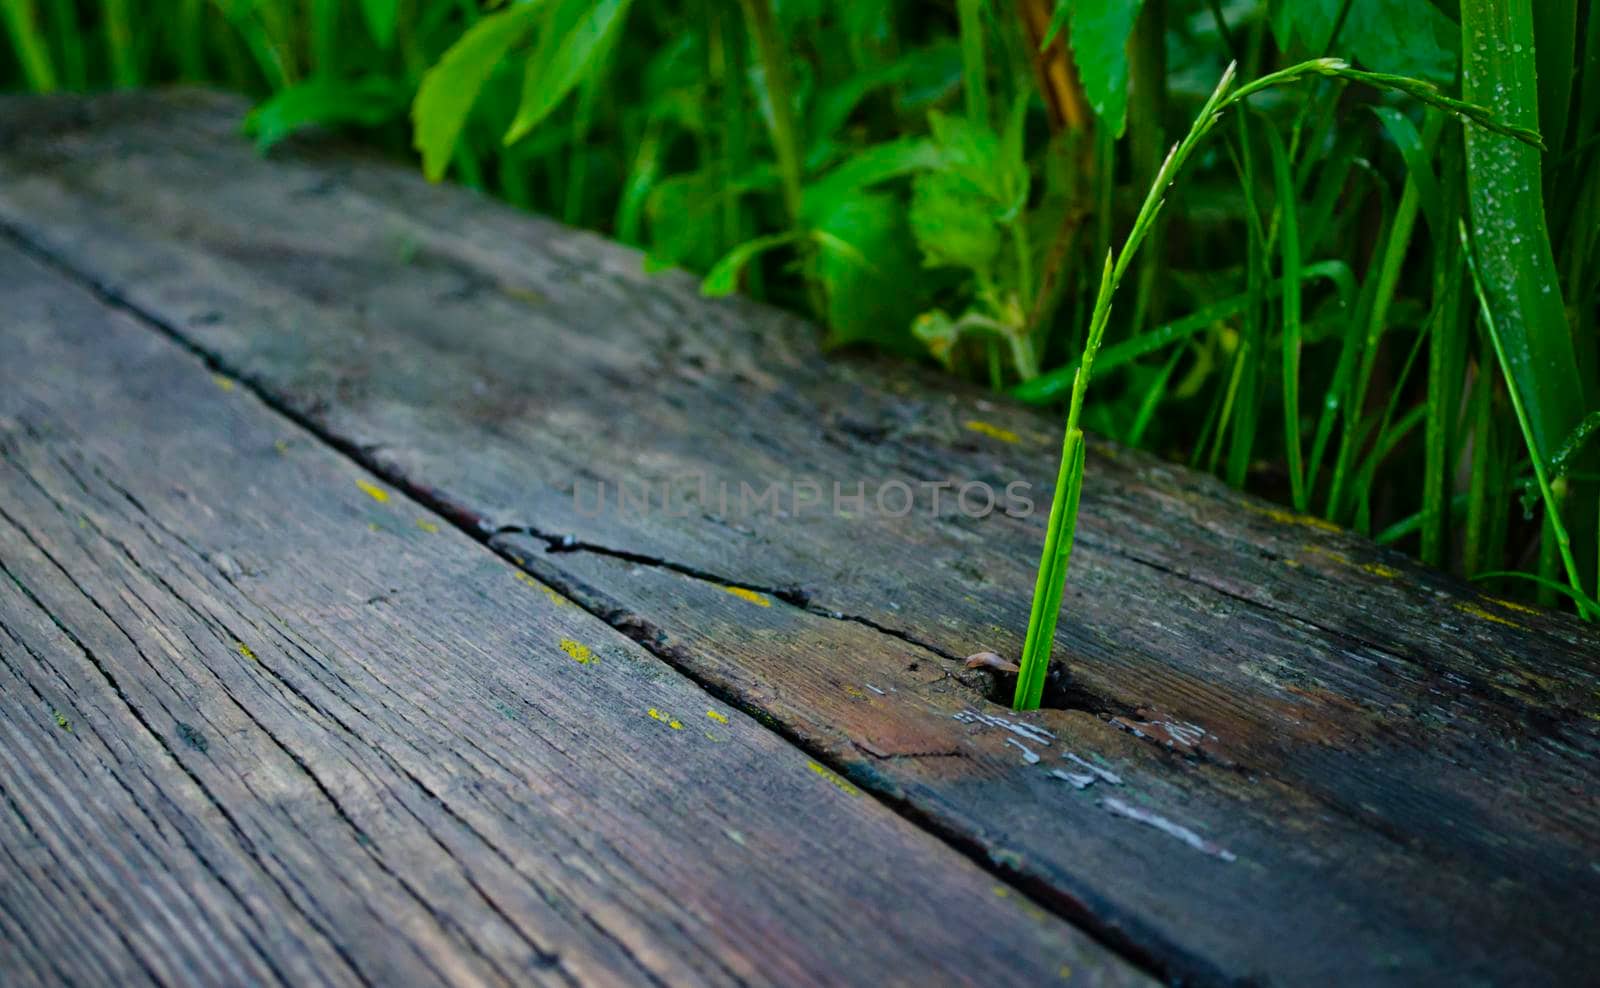 The grass is breaking through the wooden board. Close up wooden with grass. Dock of planks. Old gray wooden plank and green grass breaking through the planks.